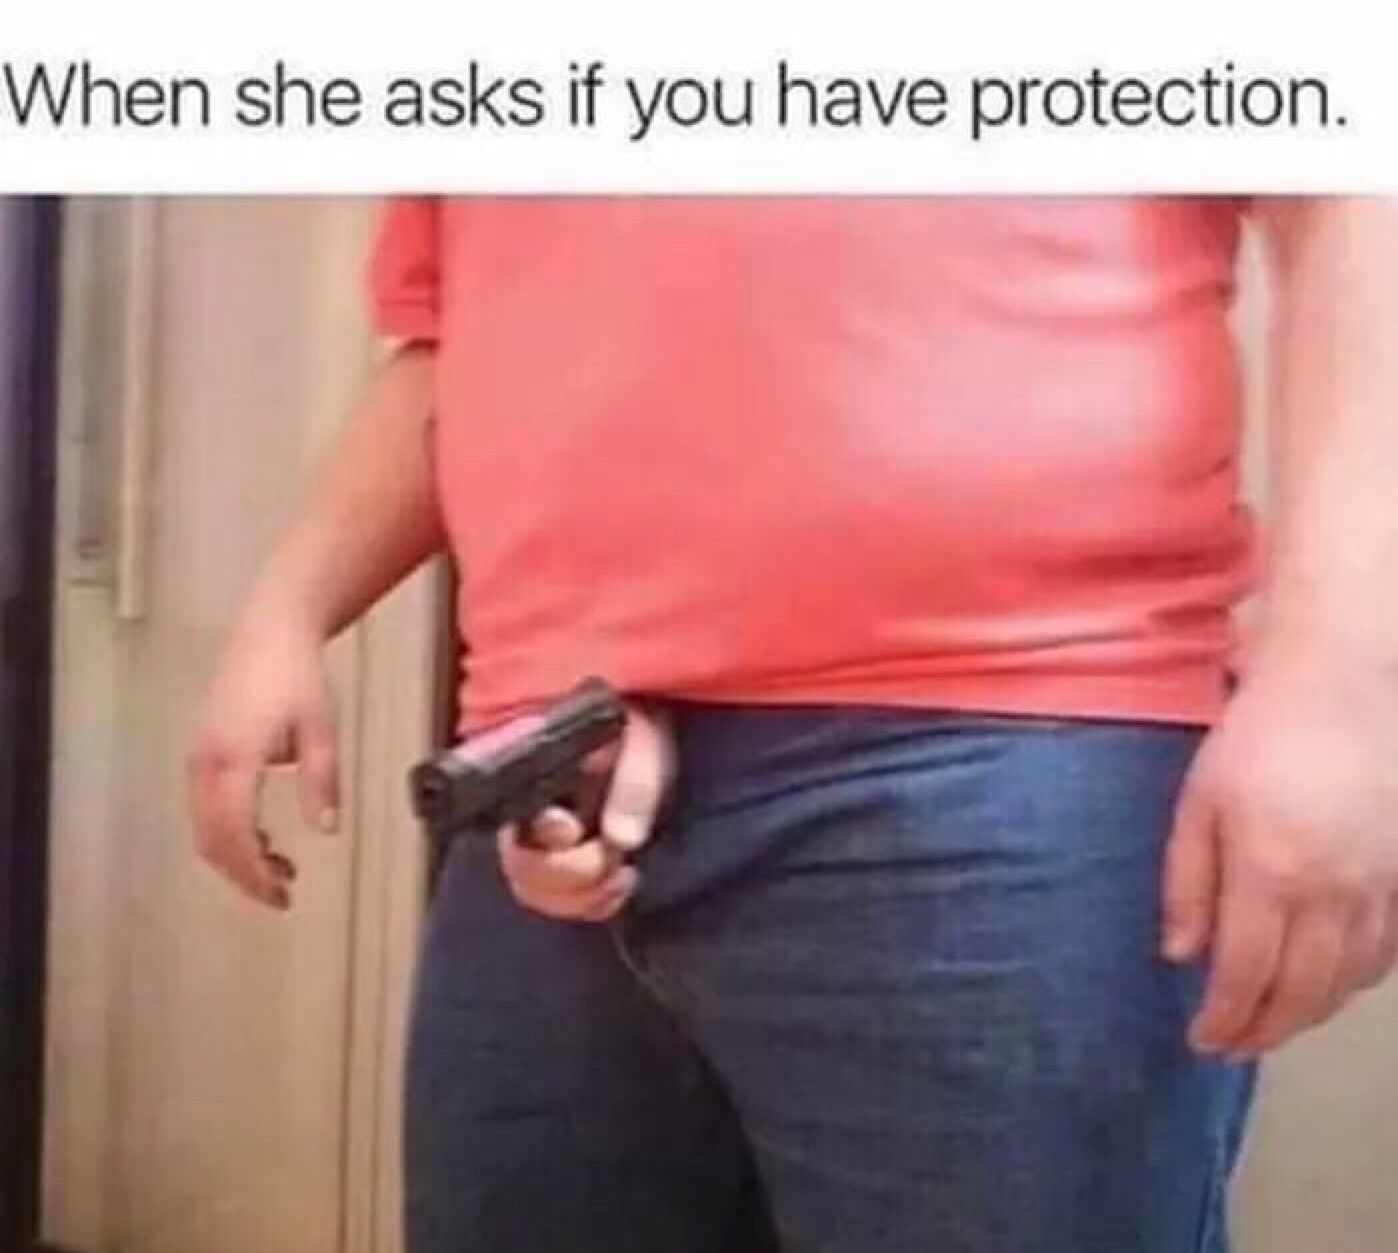 she asks if you have protection - When she asks if you have protection.